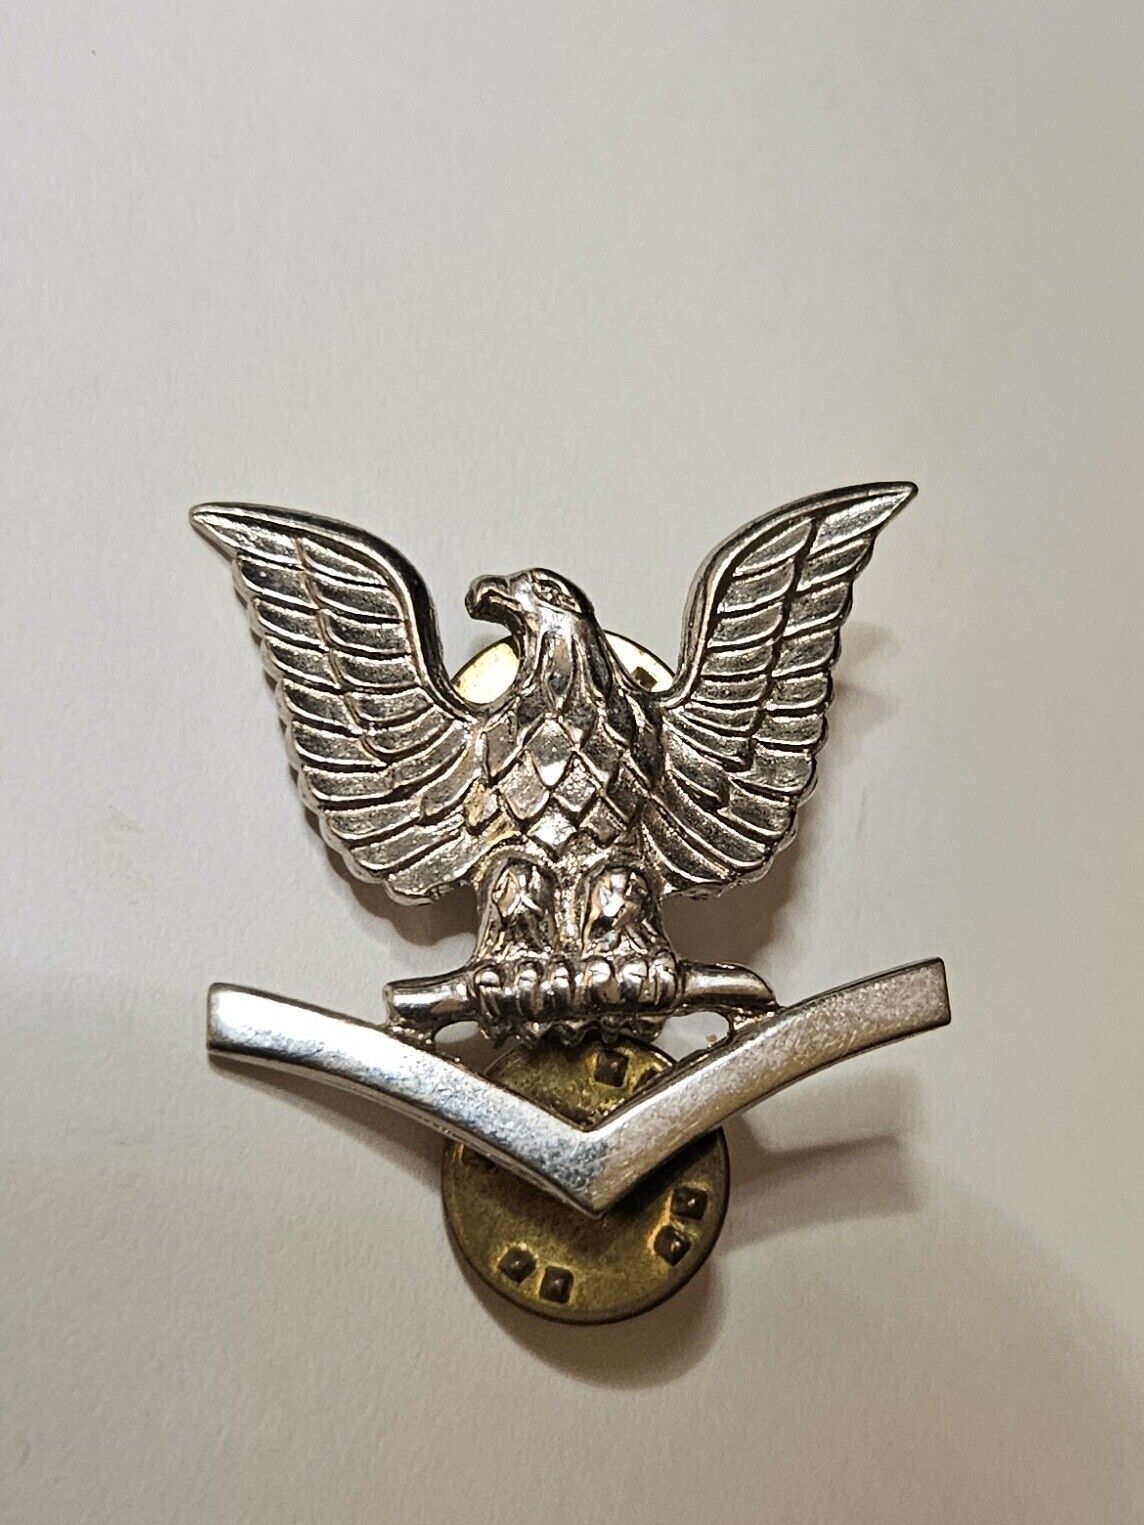 Vintage WWII Right Facing Lapel Pin US NAVY Petty Officer 3rd Class E-4